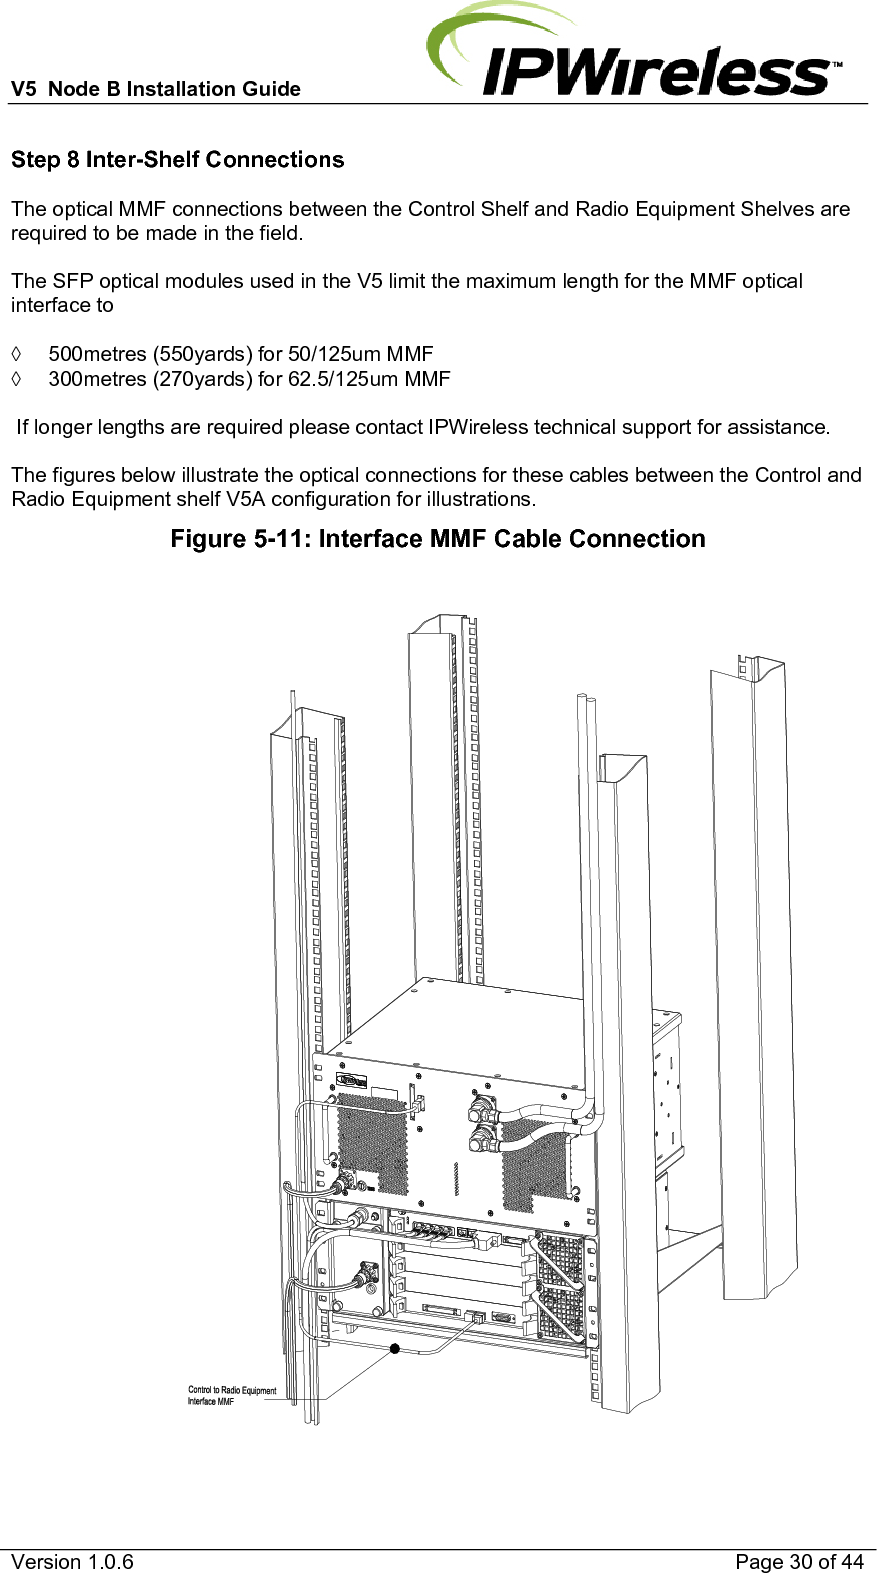 V5  Node B Installation Guide                           Version 1.0.6    Page 30 of 44 Step 8 Inter-Shelf Connections The optical MMF connections between the Control Shelf and Radio Equipment Shelves are required to be made in the field.  The SFP optical modules used in the V5 limit the maximum length for the MMF optical interface to  ◊  500metres (550yards) for 50/125um MMF ◊  300metres (270yards) for 62.5/125um MMF   If longer lengths are required please contact IPWireless technical support for assistance.  The figures below illustrate the optical connections for these cables between the Control and Radio Equipment shelf V5A configuration for illustrations. Figure 5-11: Interface MMF Cable Connection  